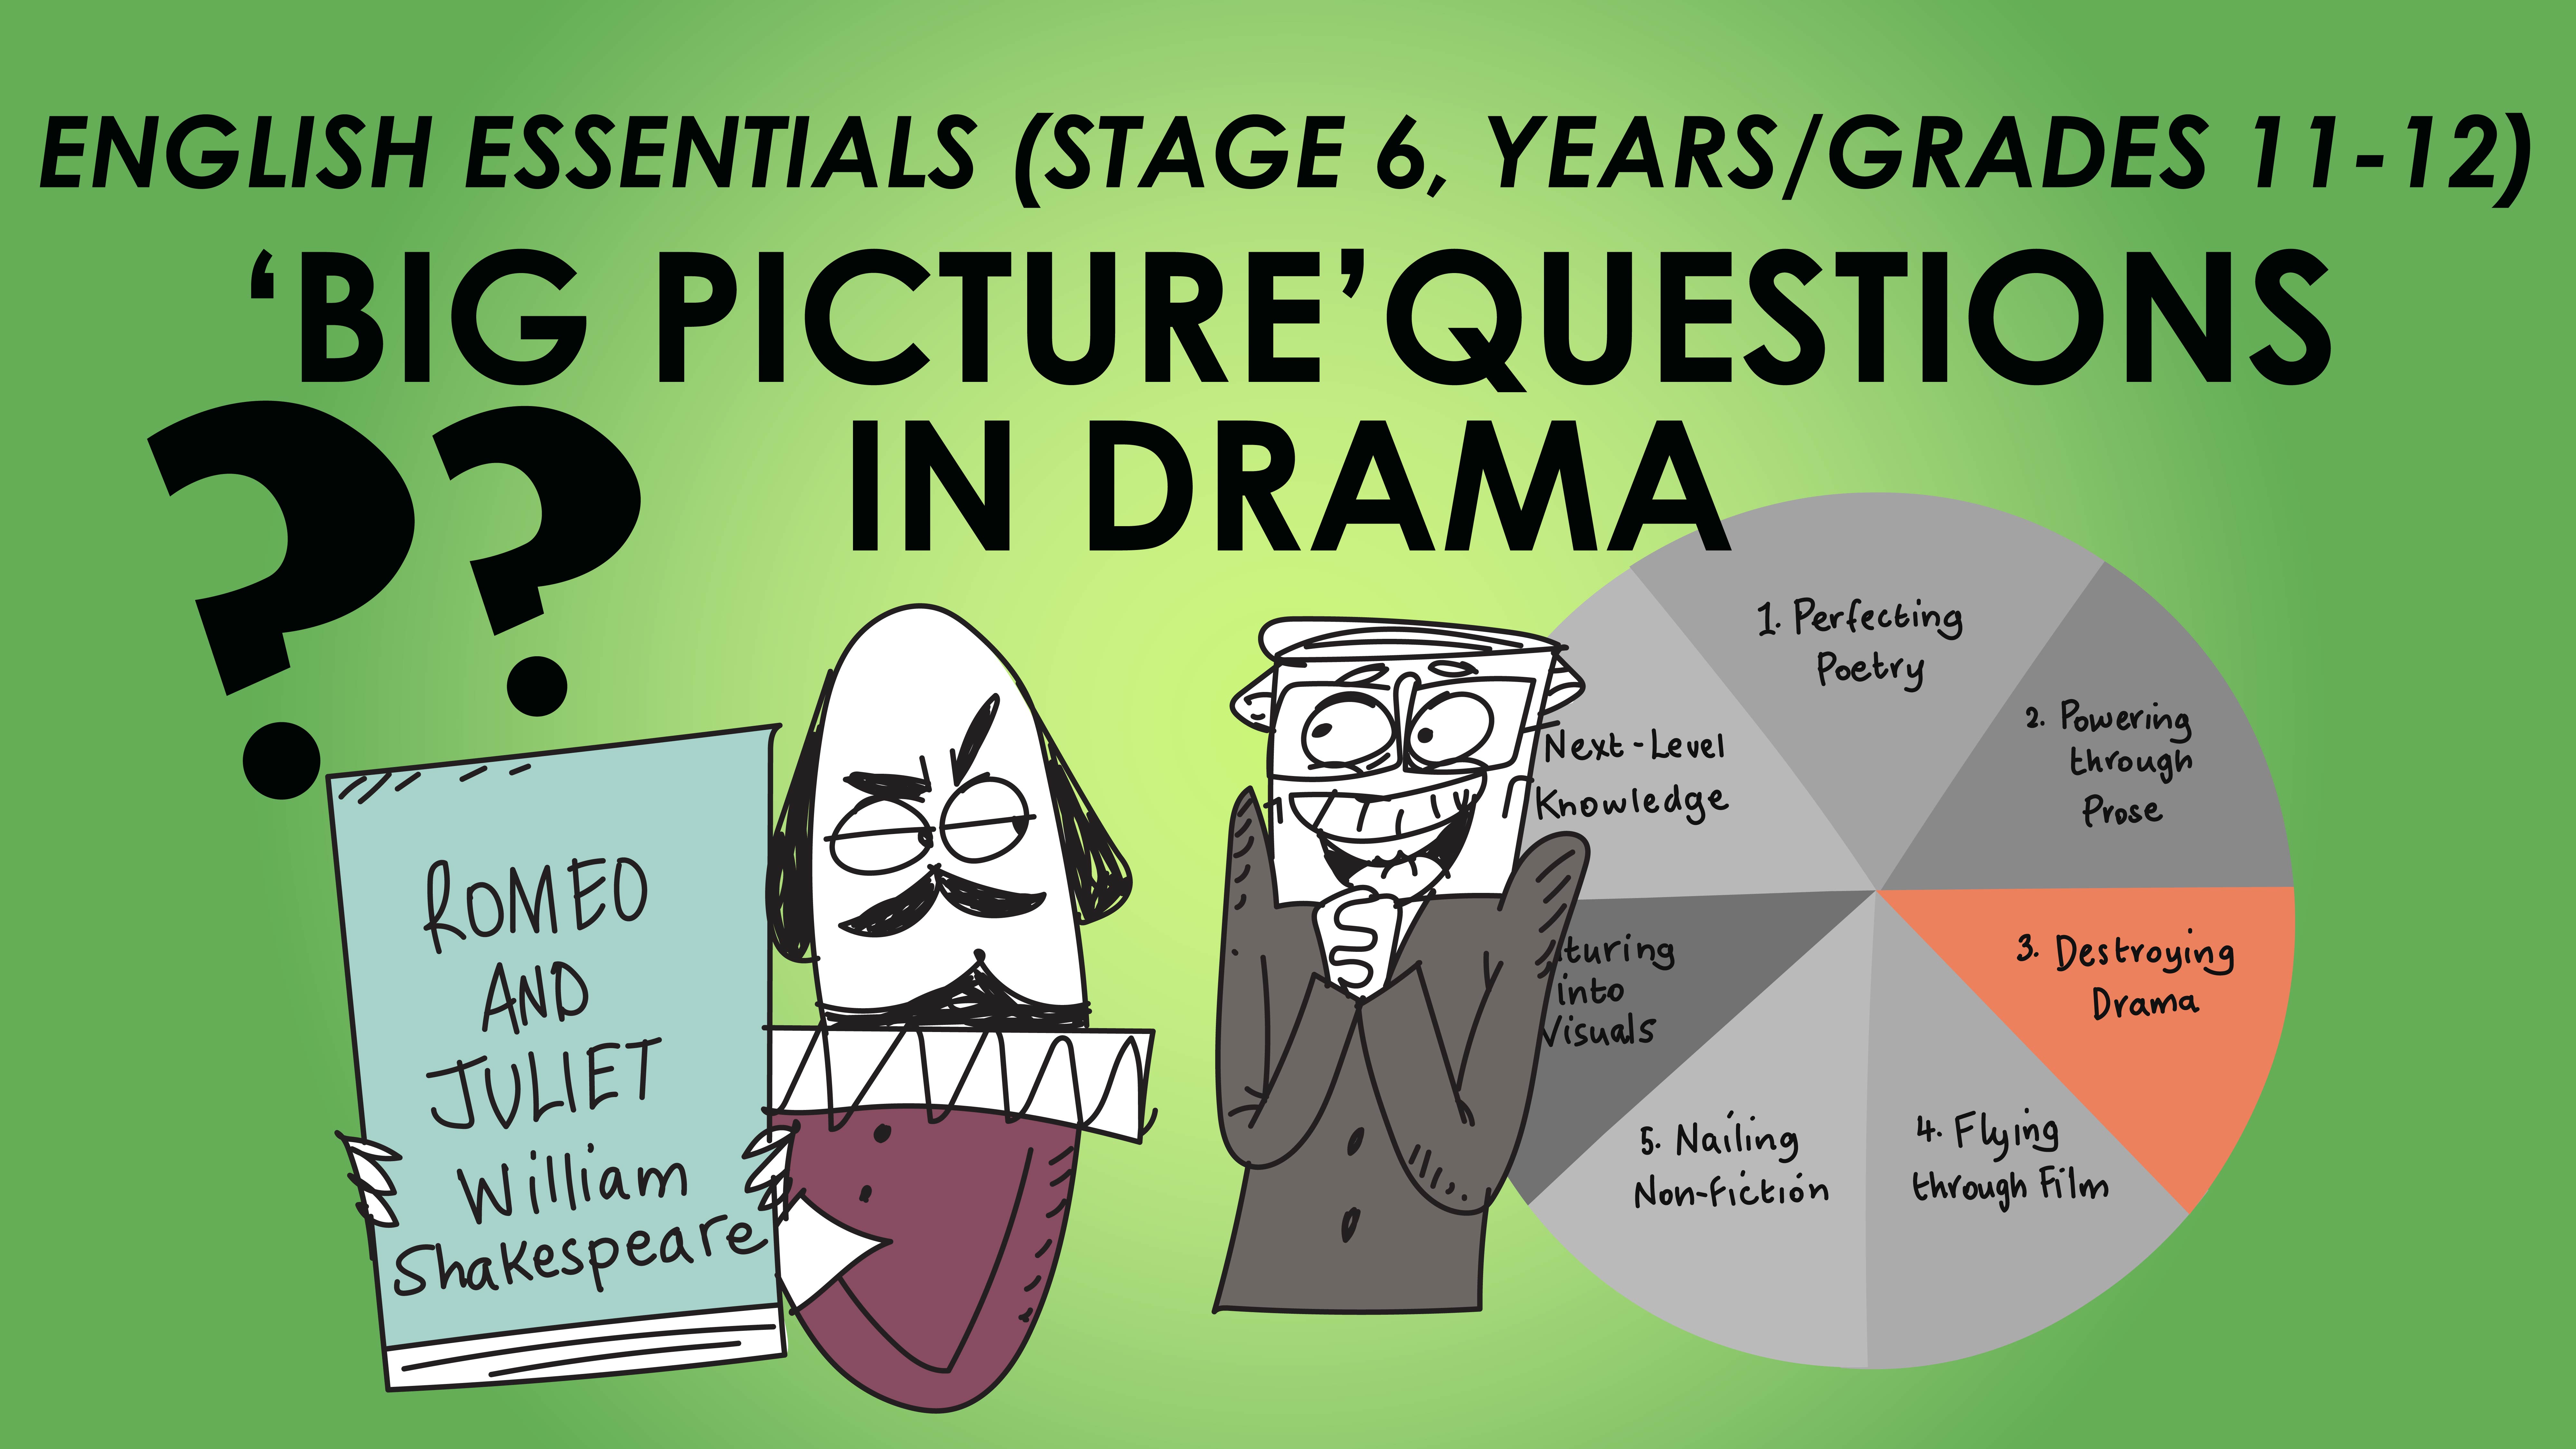 English Essentials - Destroying Drama - 'Big Picture' Questions in Drama (Stage 6, Years/Grades 11-12)